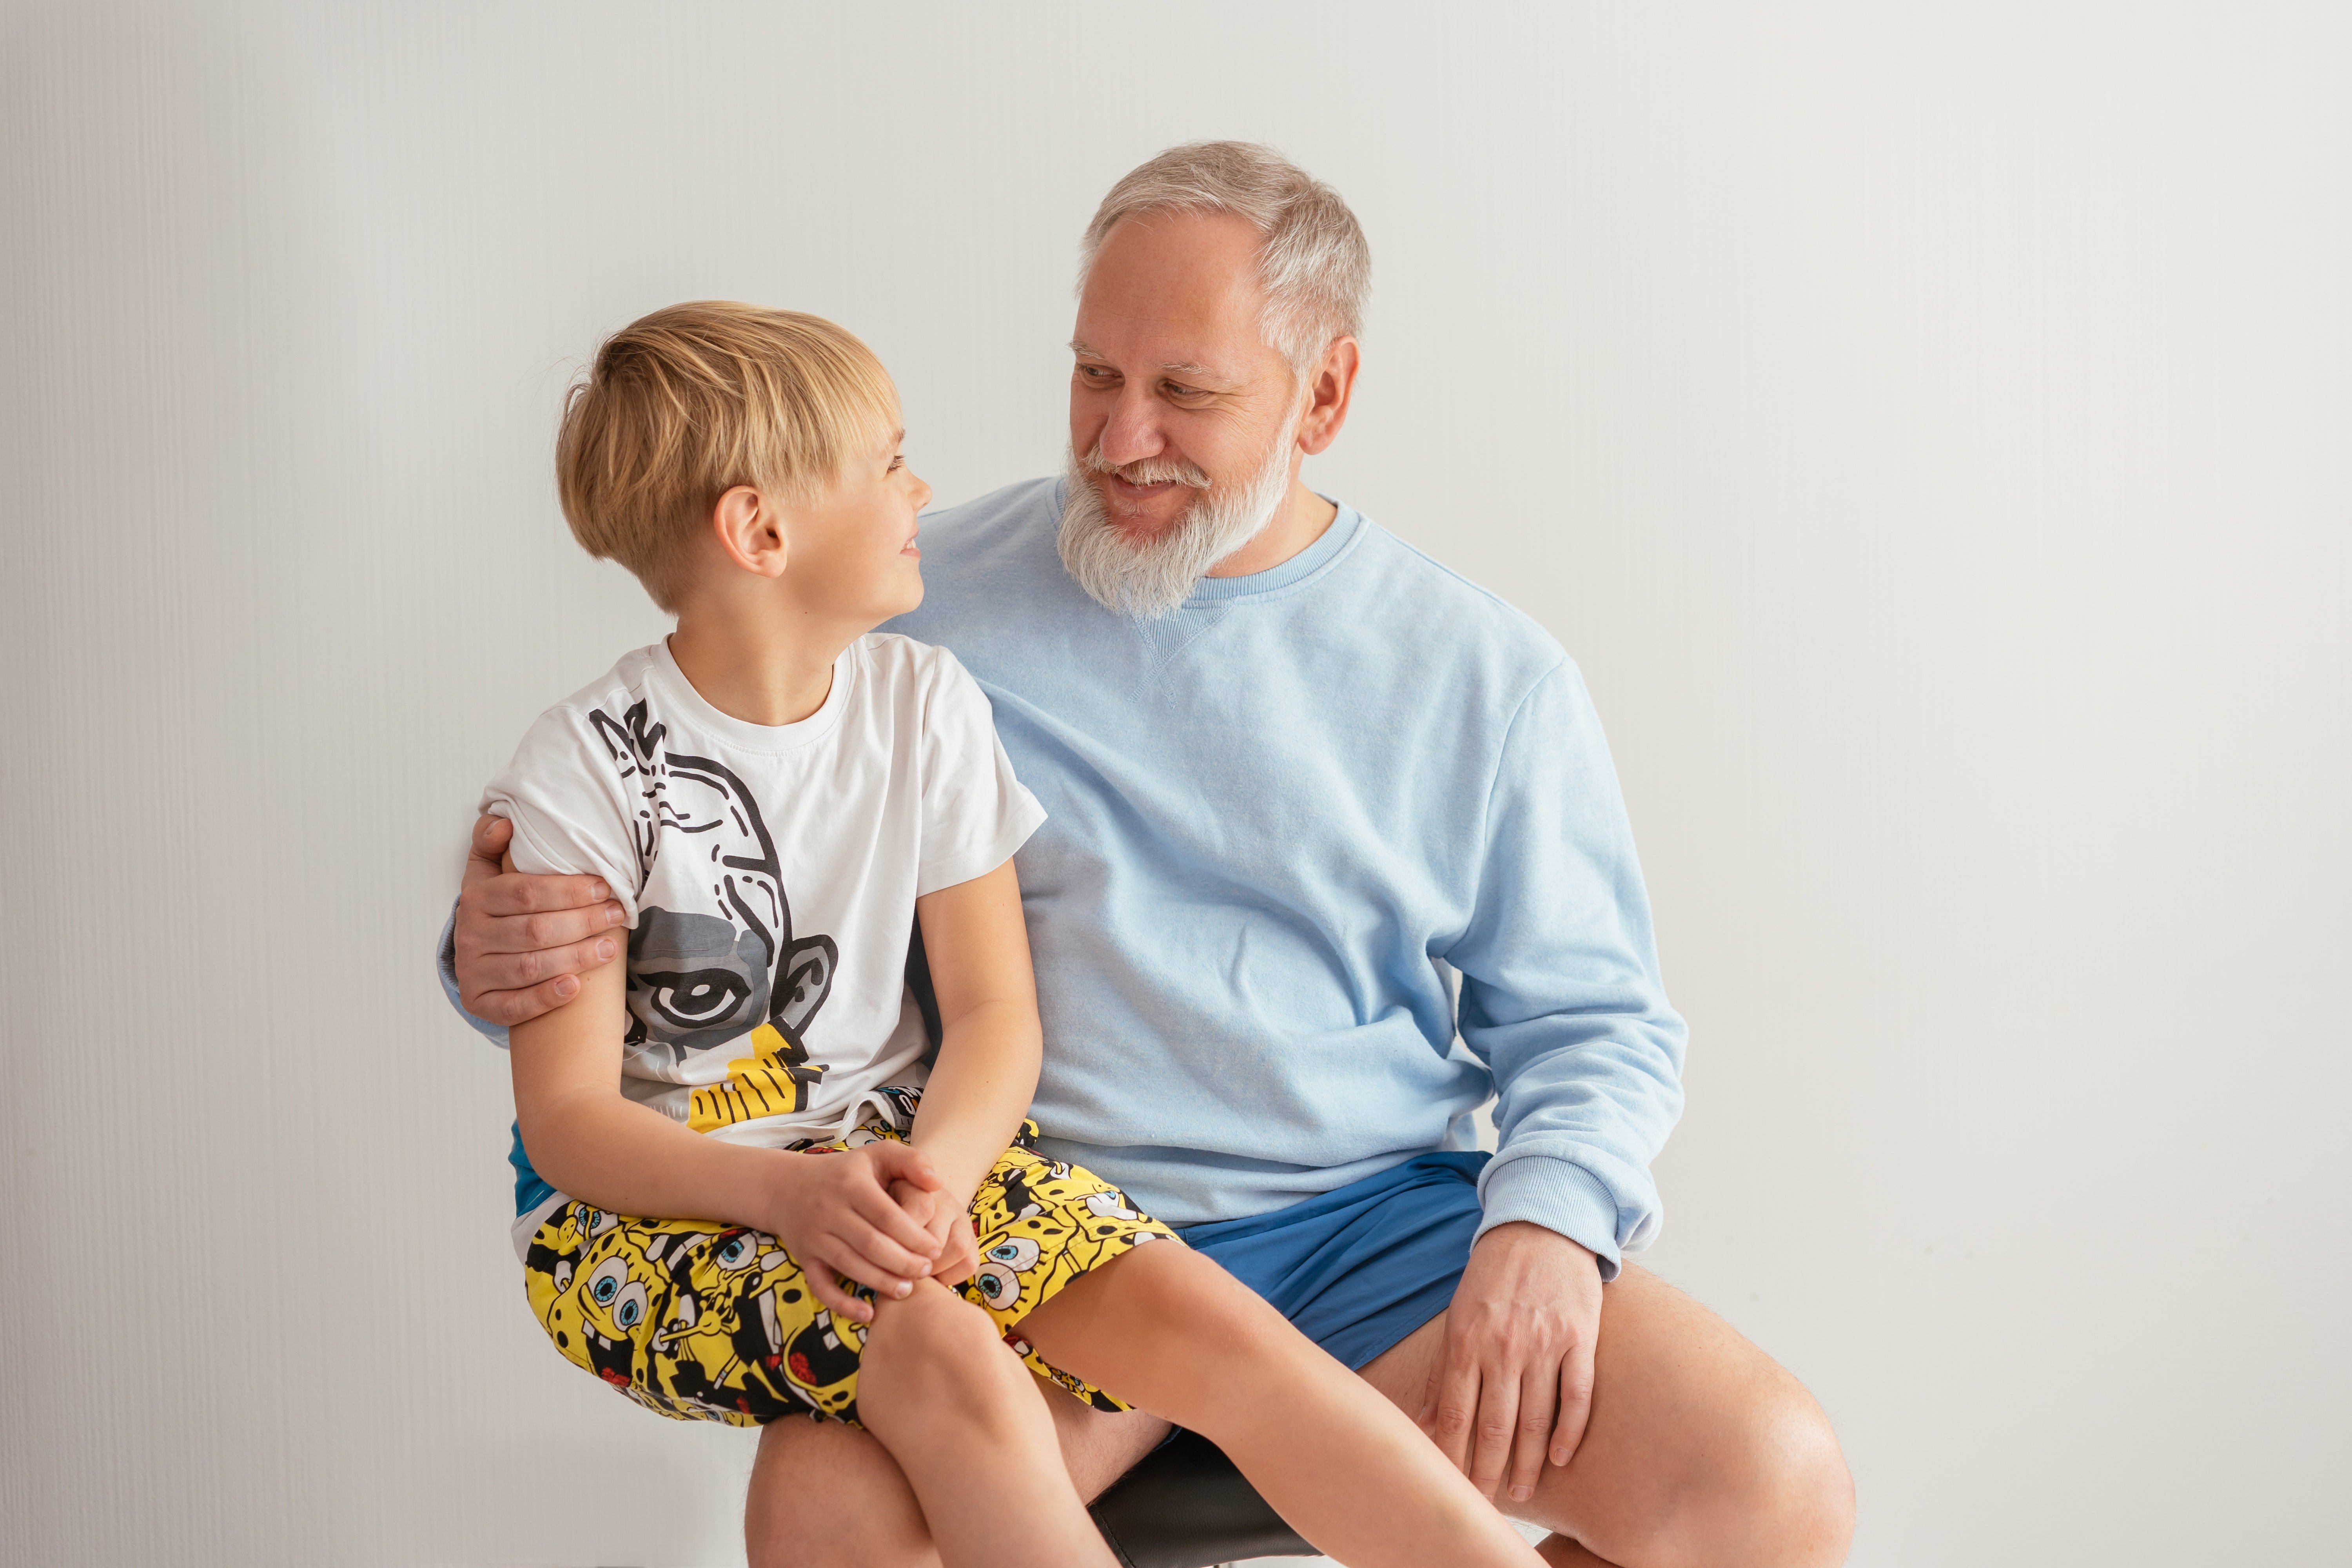 Ethan loved his grandchildren dearly, and always spent time with them. | Source: Pexels